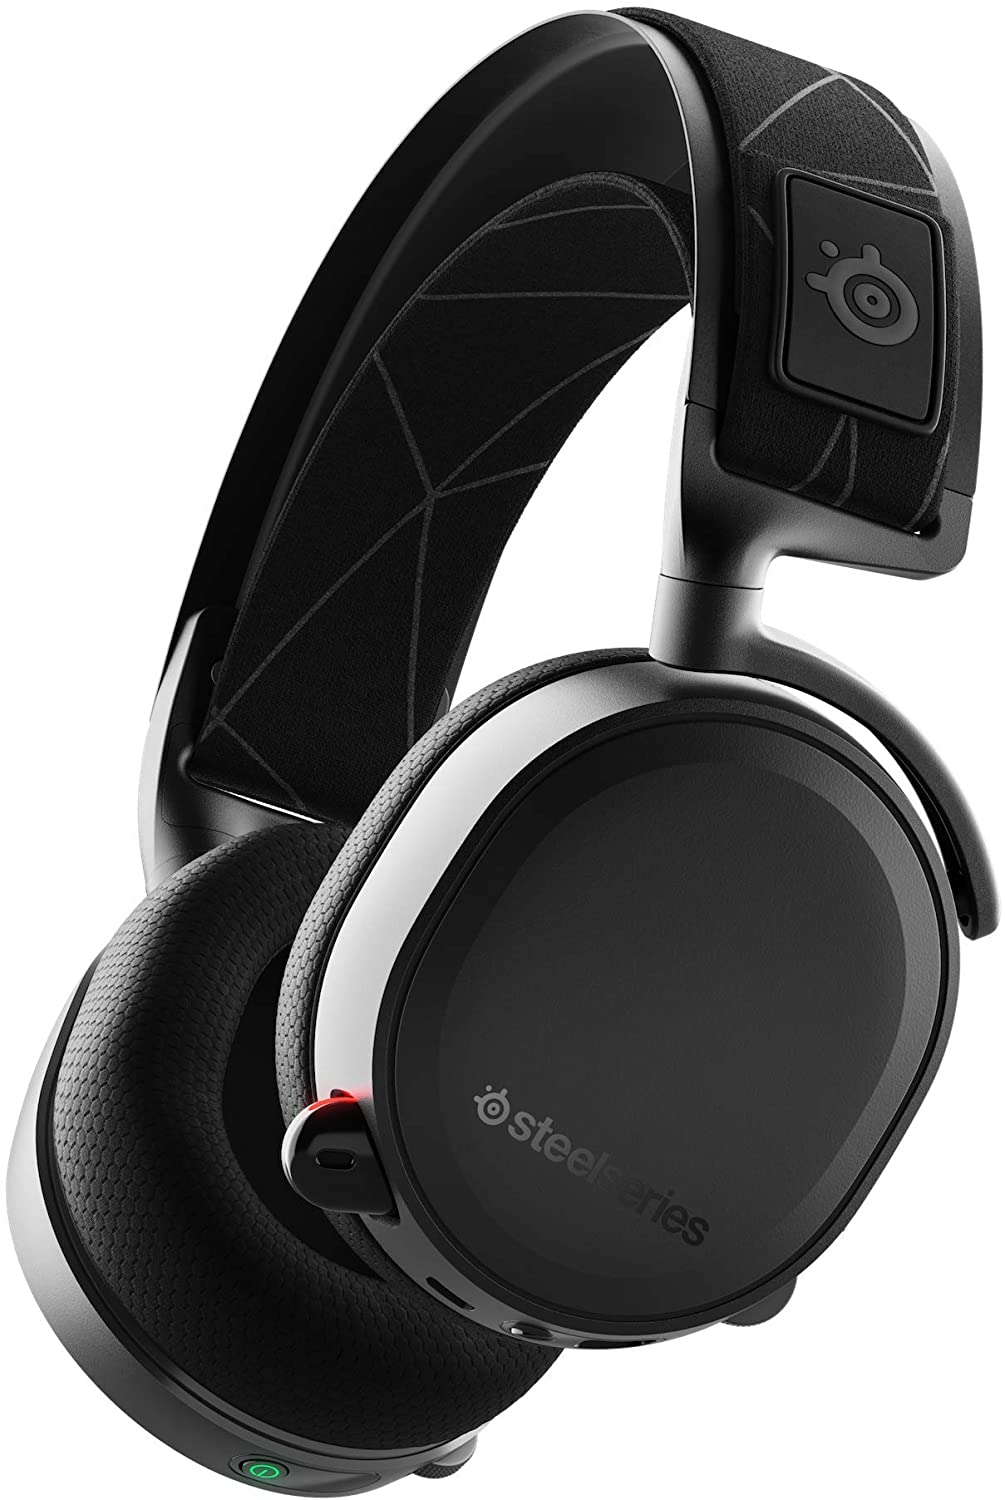 (B1) SteelSeries Arctis 7 - Gaming Headset - Lossless and Wireless - DTS Headphone